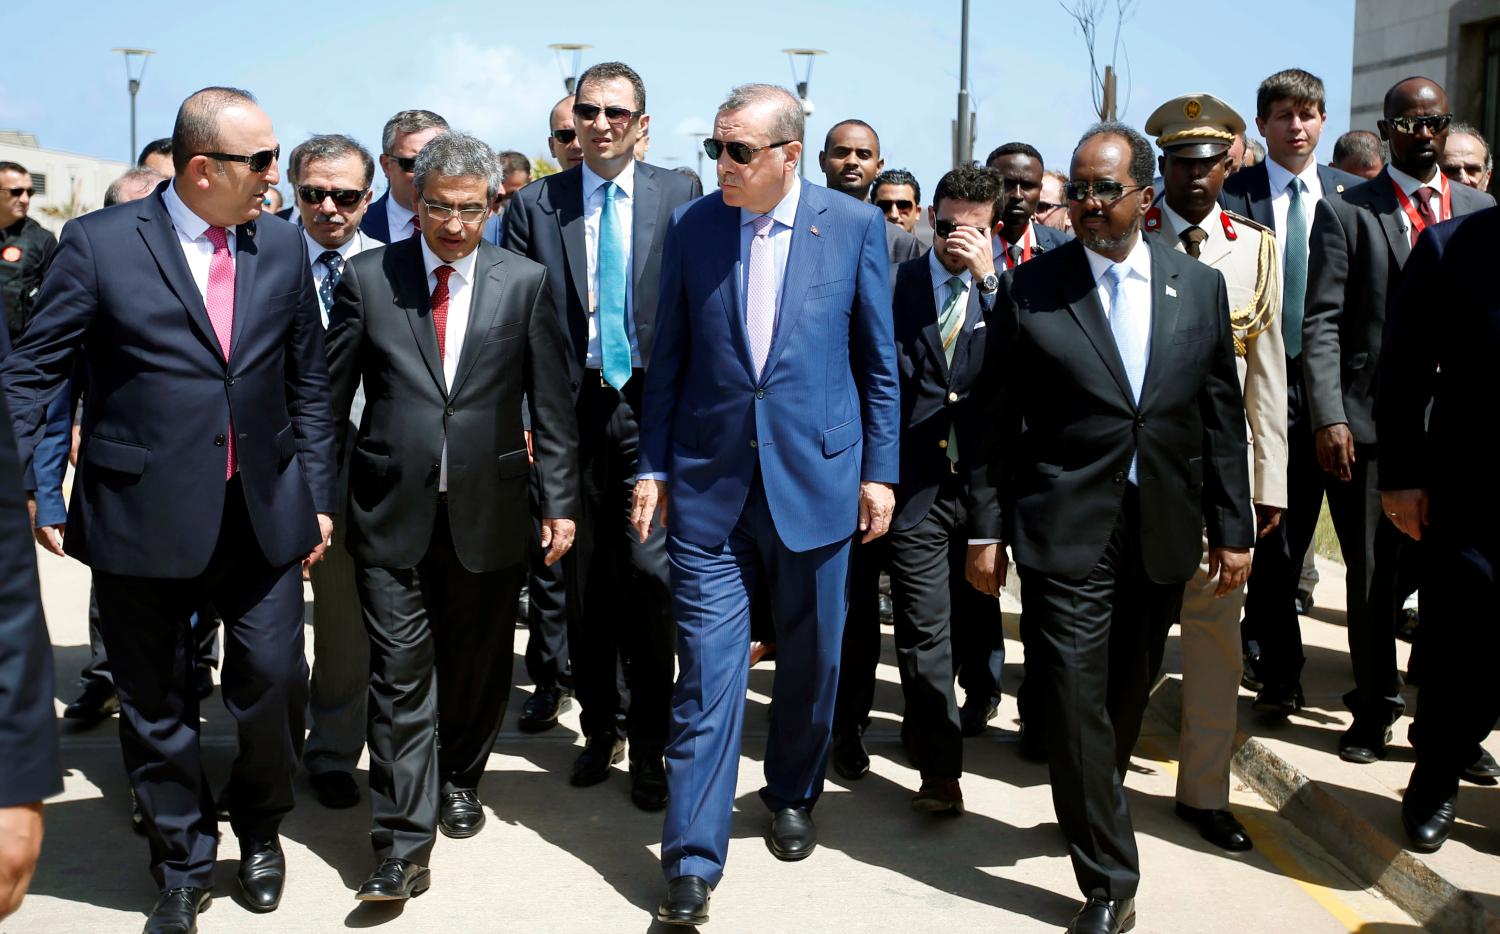 Turkish President Tayyip Erdogan (C) walks alongside Somalia's President Hassan Sheikh Mohamud (R) and other unidentified officials during the opening ceremony of the new Turkish embassy in Abdiazizi district of Somalia's capital Mogadishu, June 3, 2016. REUTERS/Feisal Omar - S1AETHUSPPAA